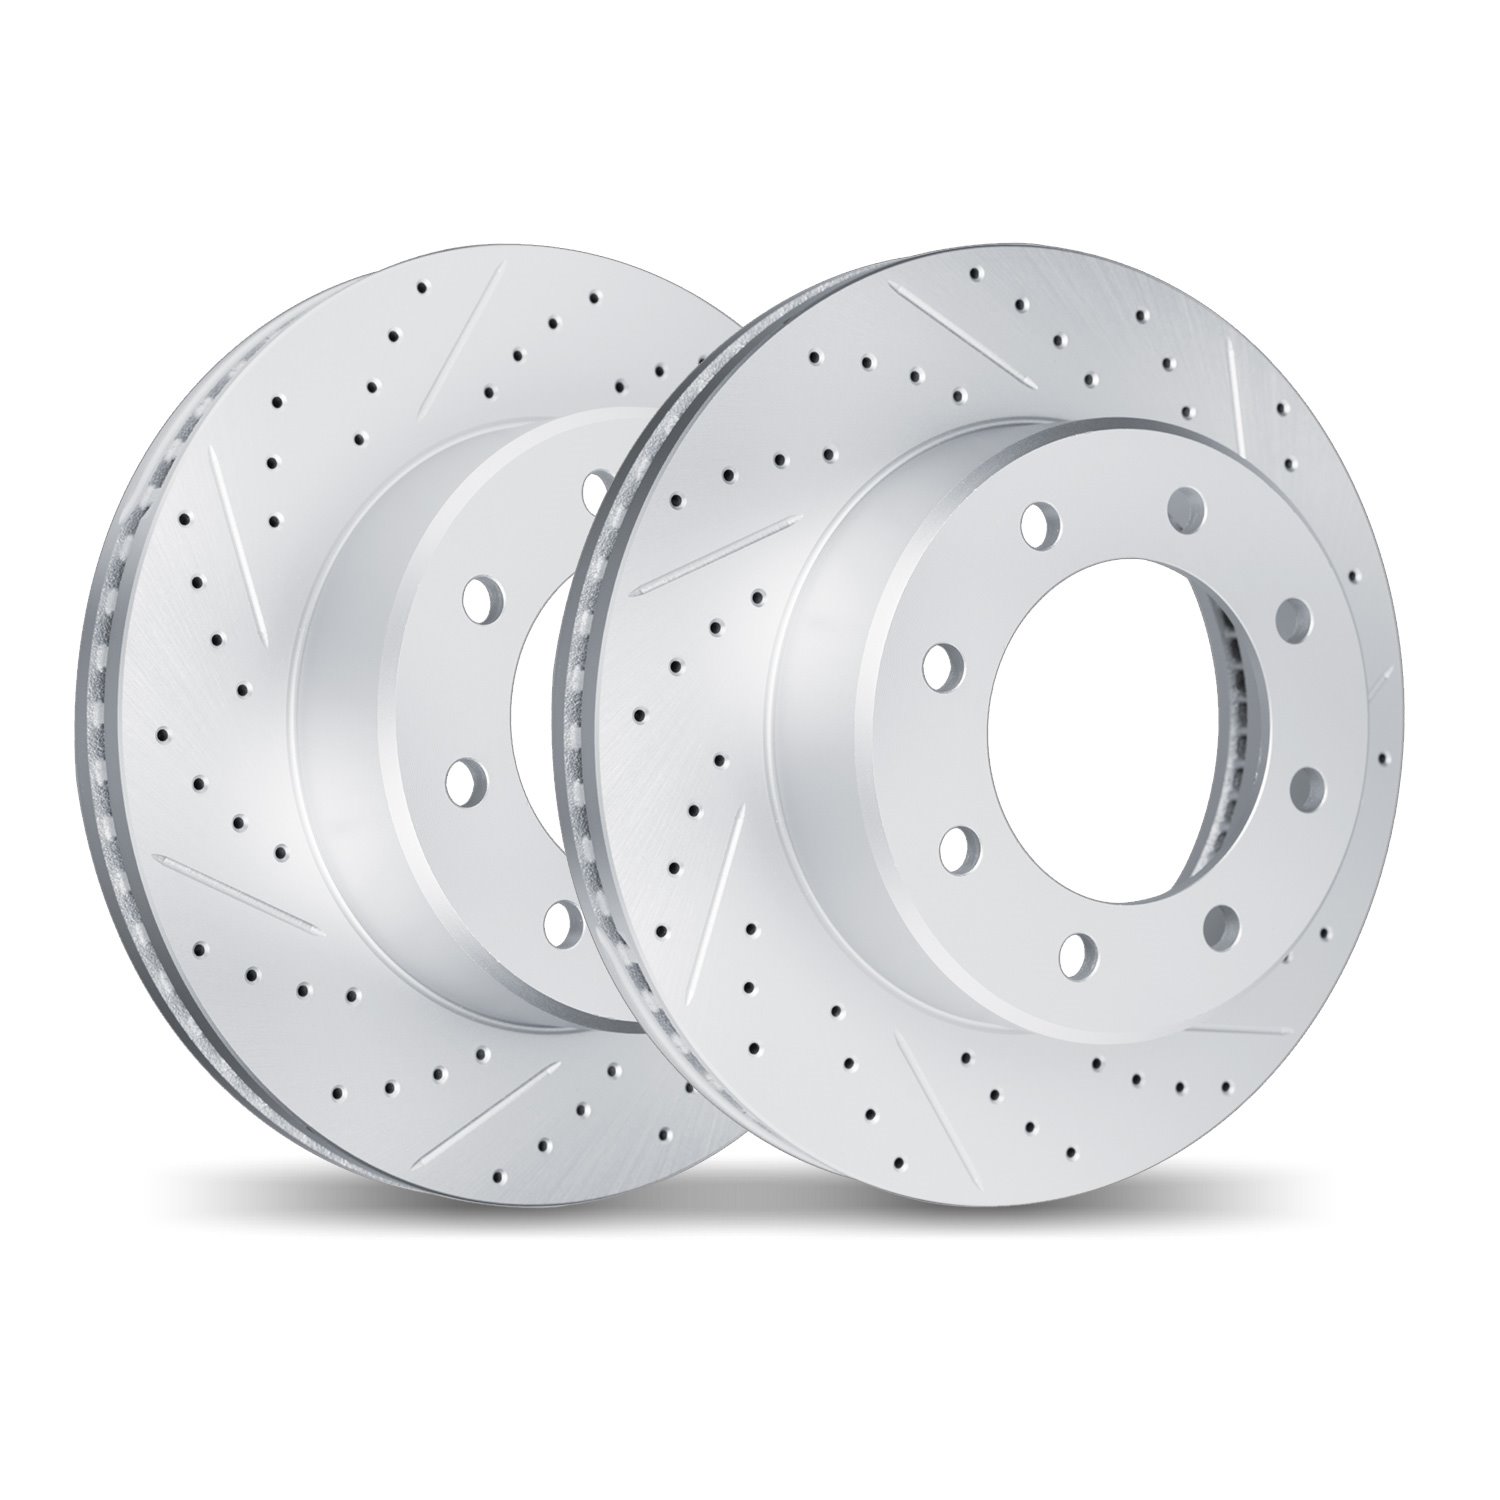 2002-48020 Geoperformance Drilled/Slotted Brake Rotors, 1976-1996 GM, Position: Front